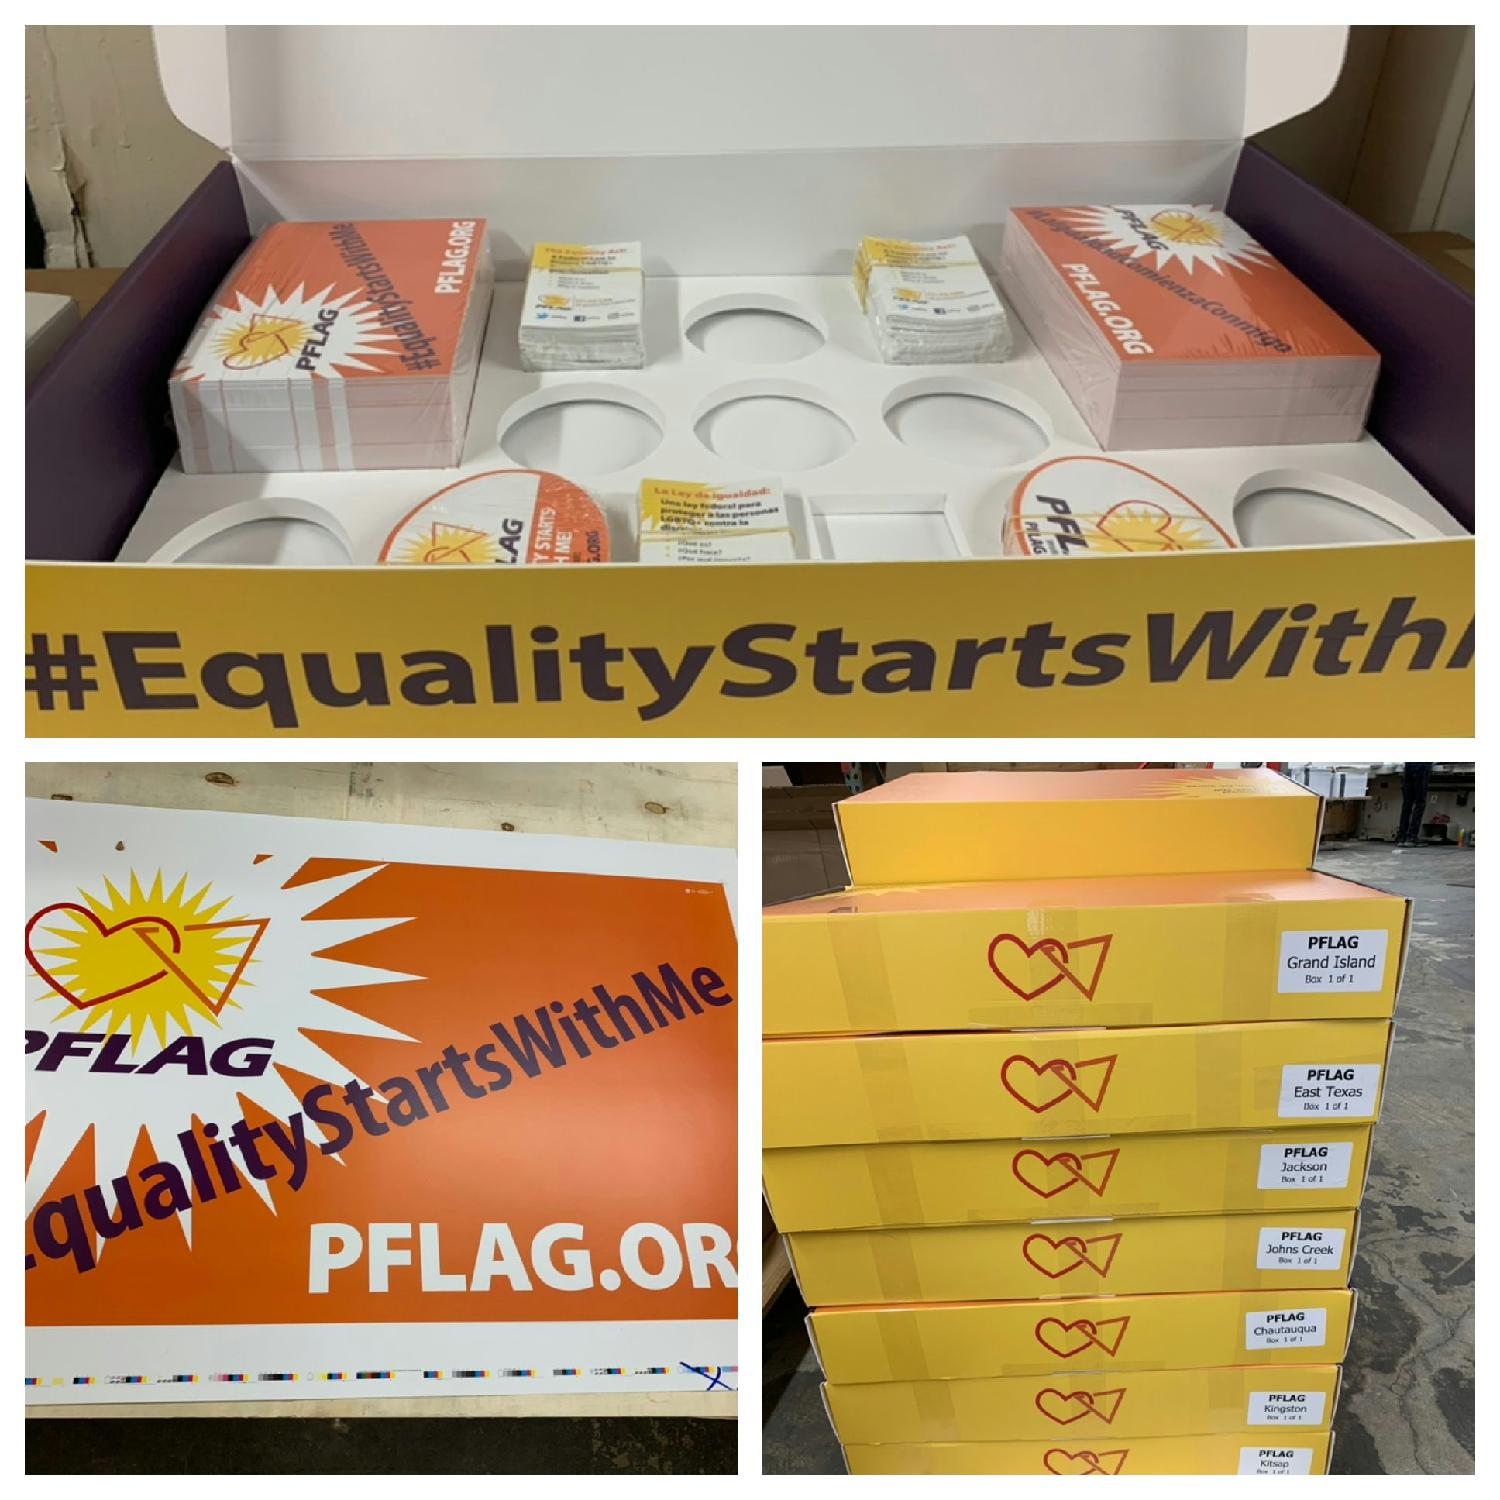 A great project for PFLAG!